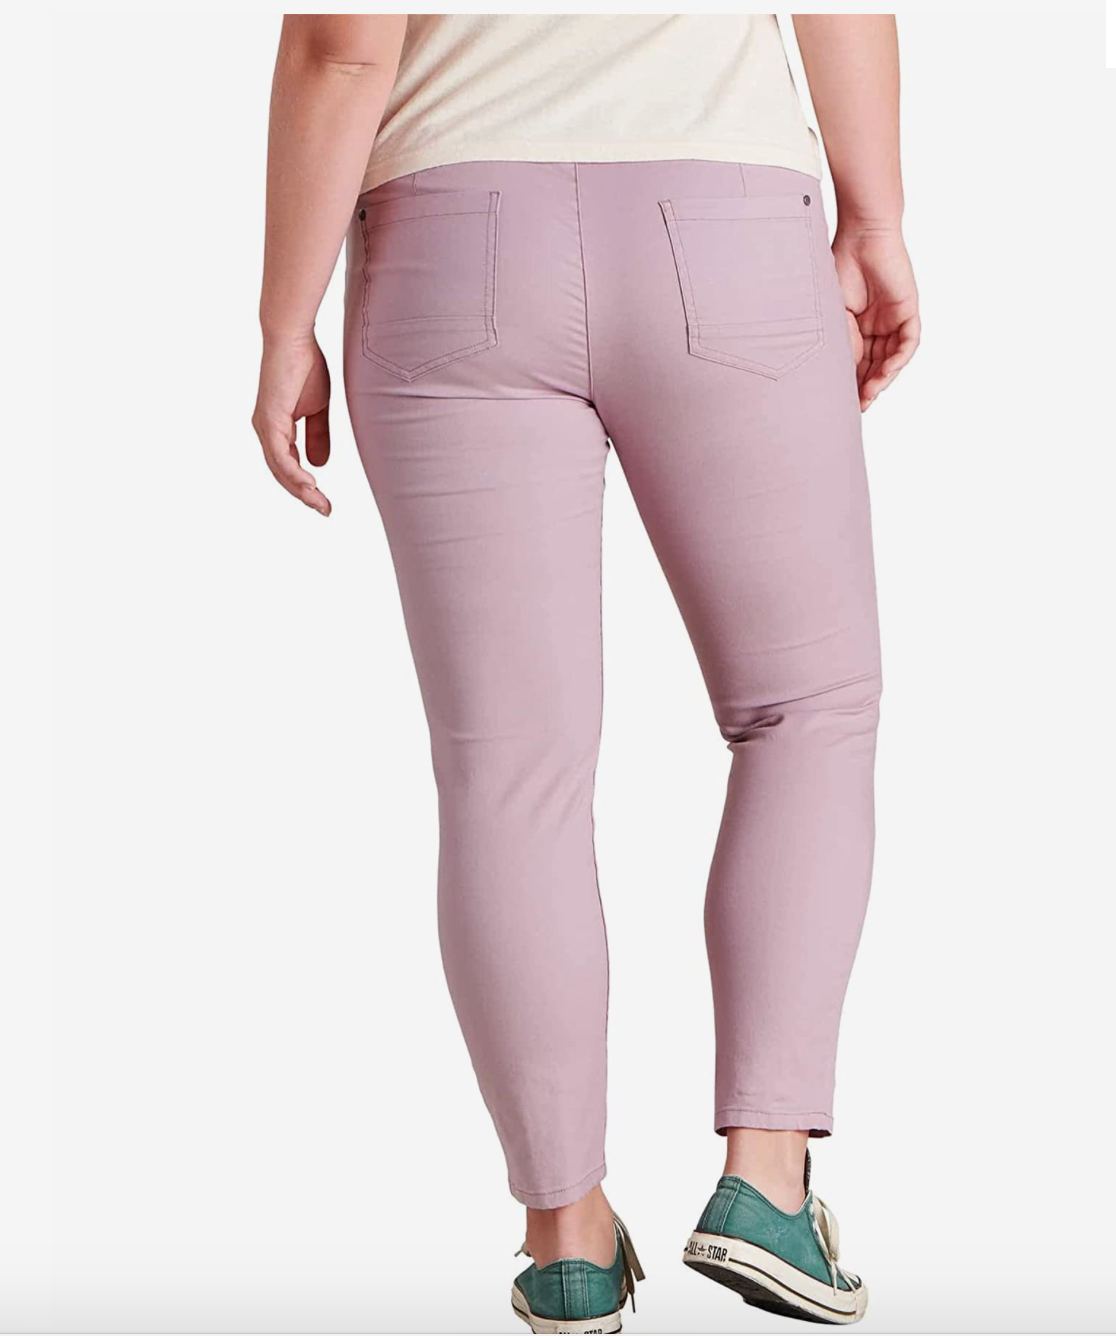 Earthworks Ankle Pant - Lilac - FINAL SALE